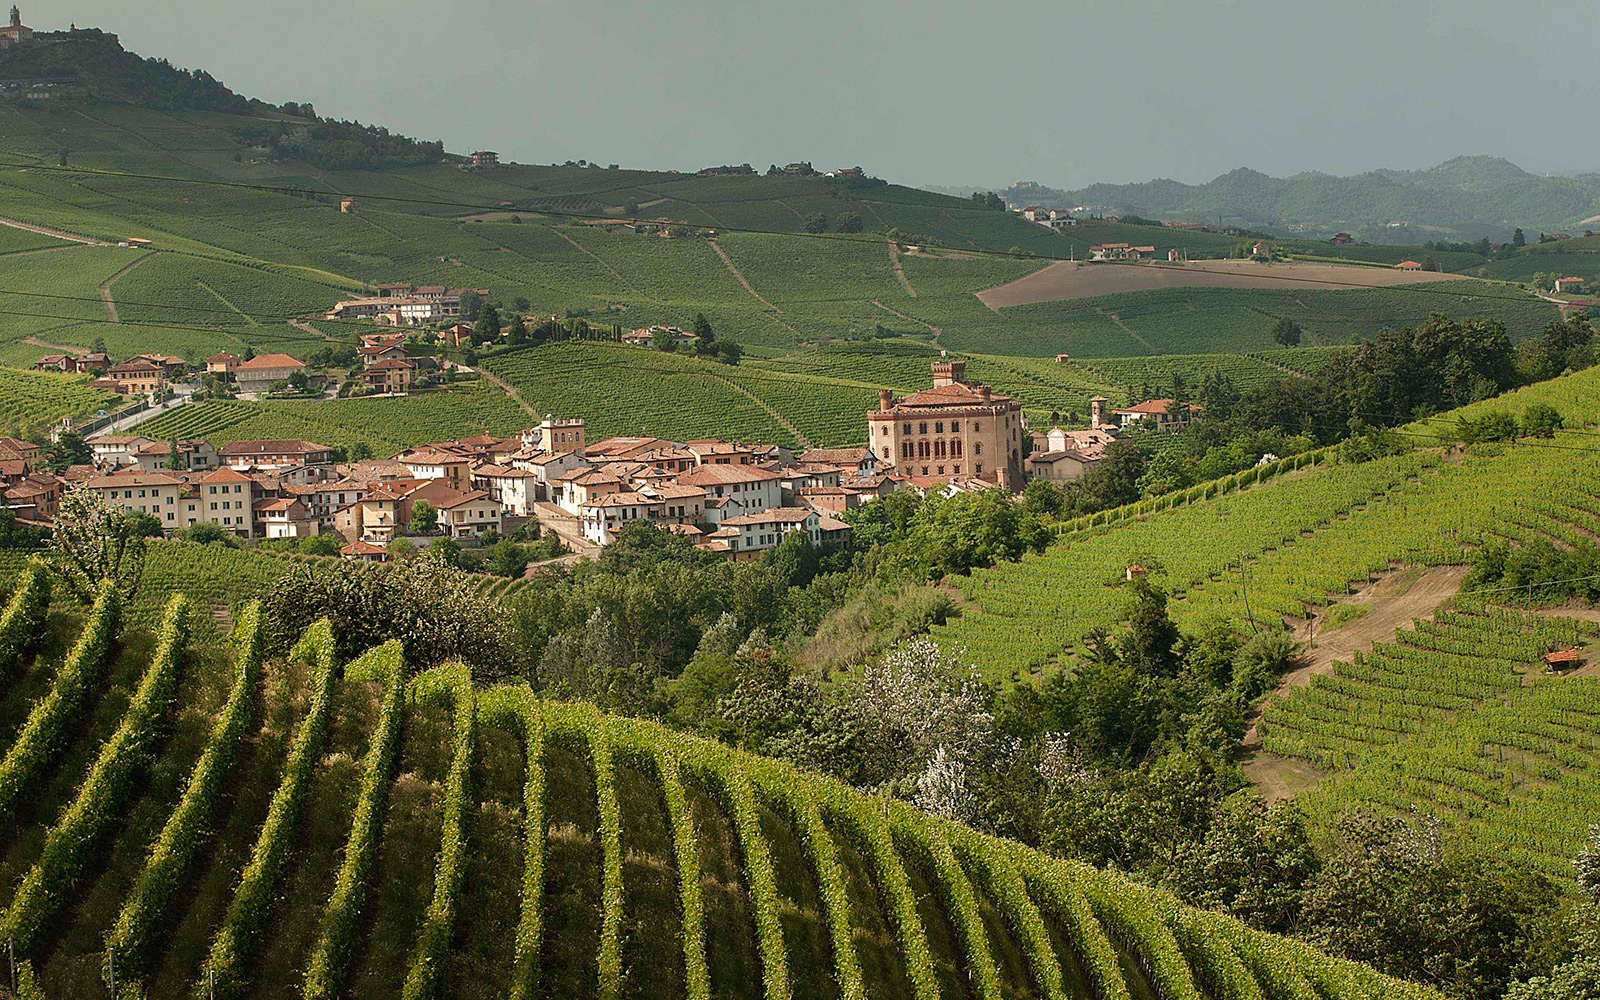 The village of Barolo. Photo Association for the Heritage of the Wine-growing Landscapes of Langhe-Roero and Monferrato